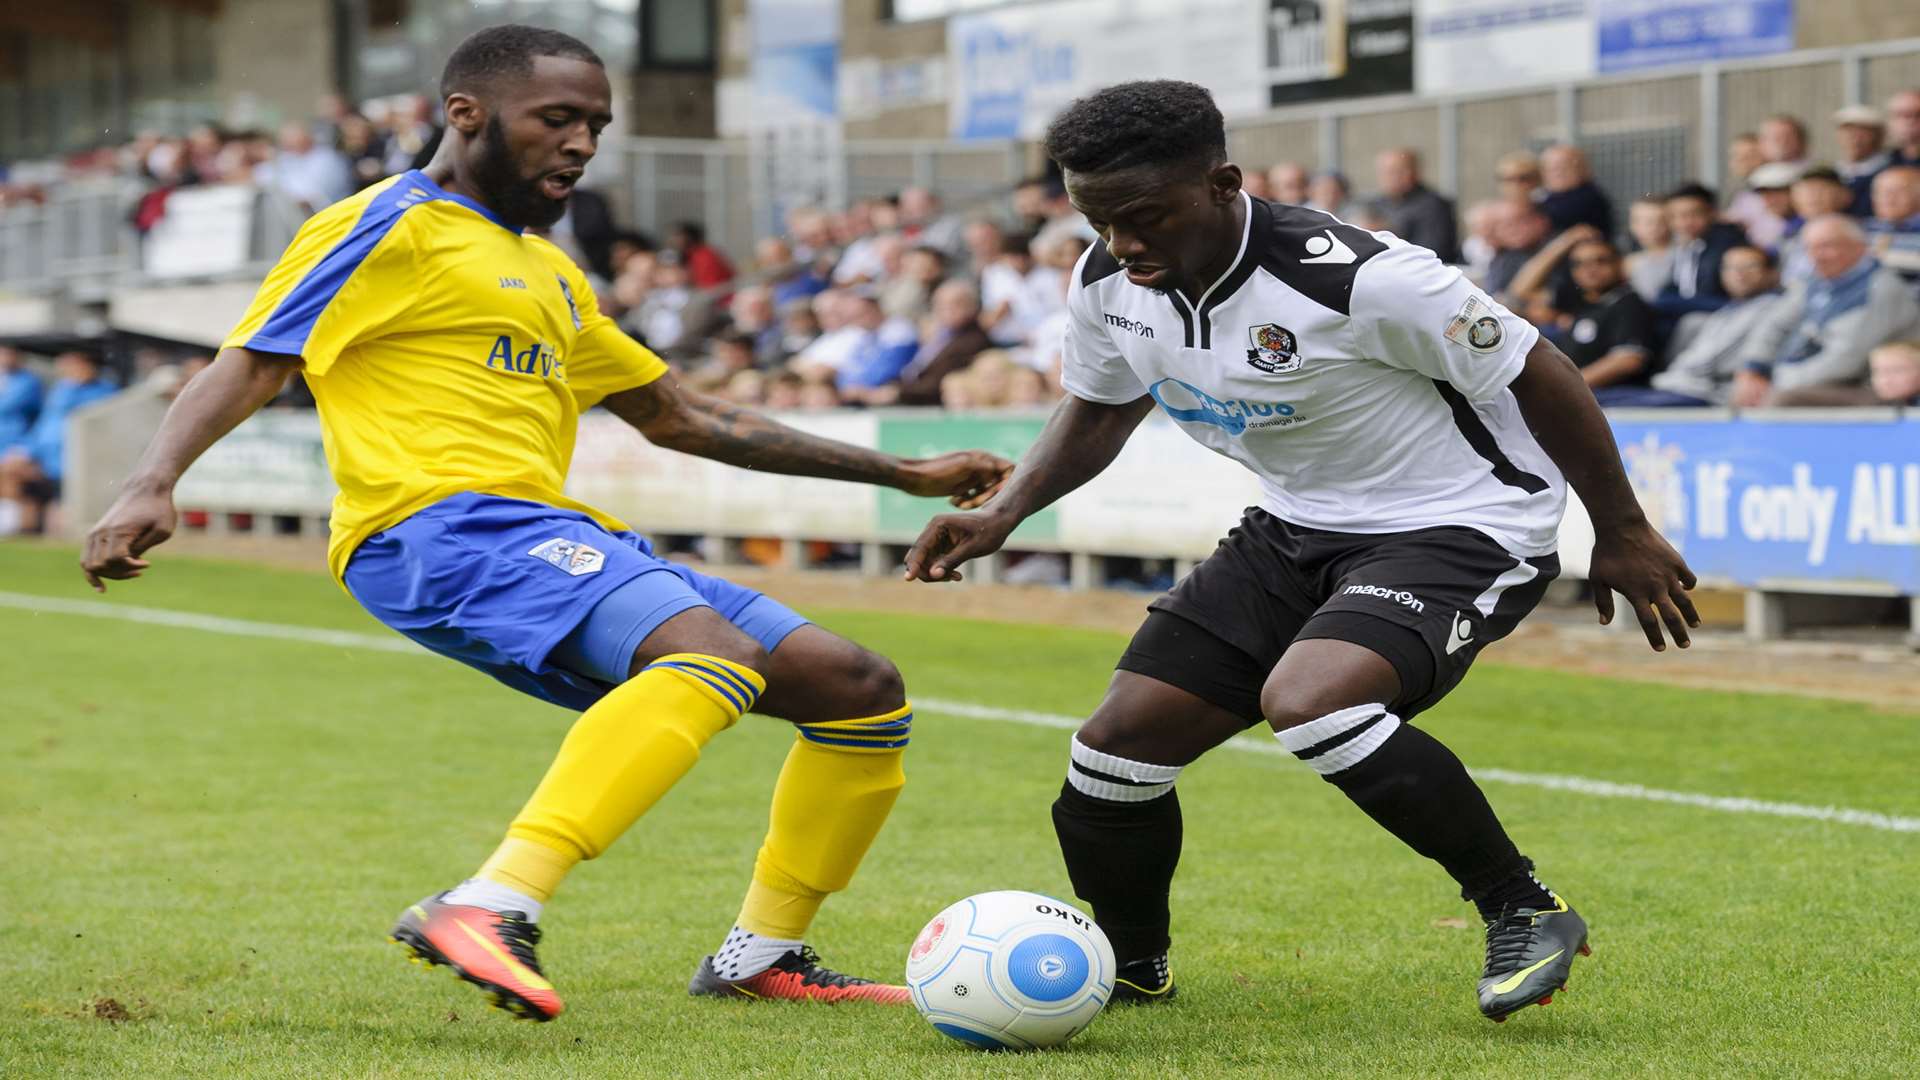 Luke Wanadio on the ball for Dartford Picture: Andy Payton